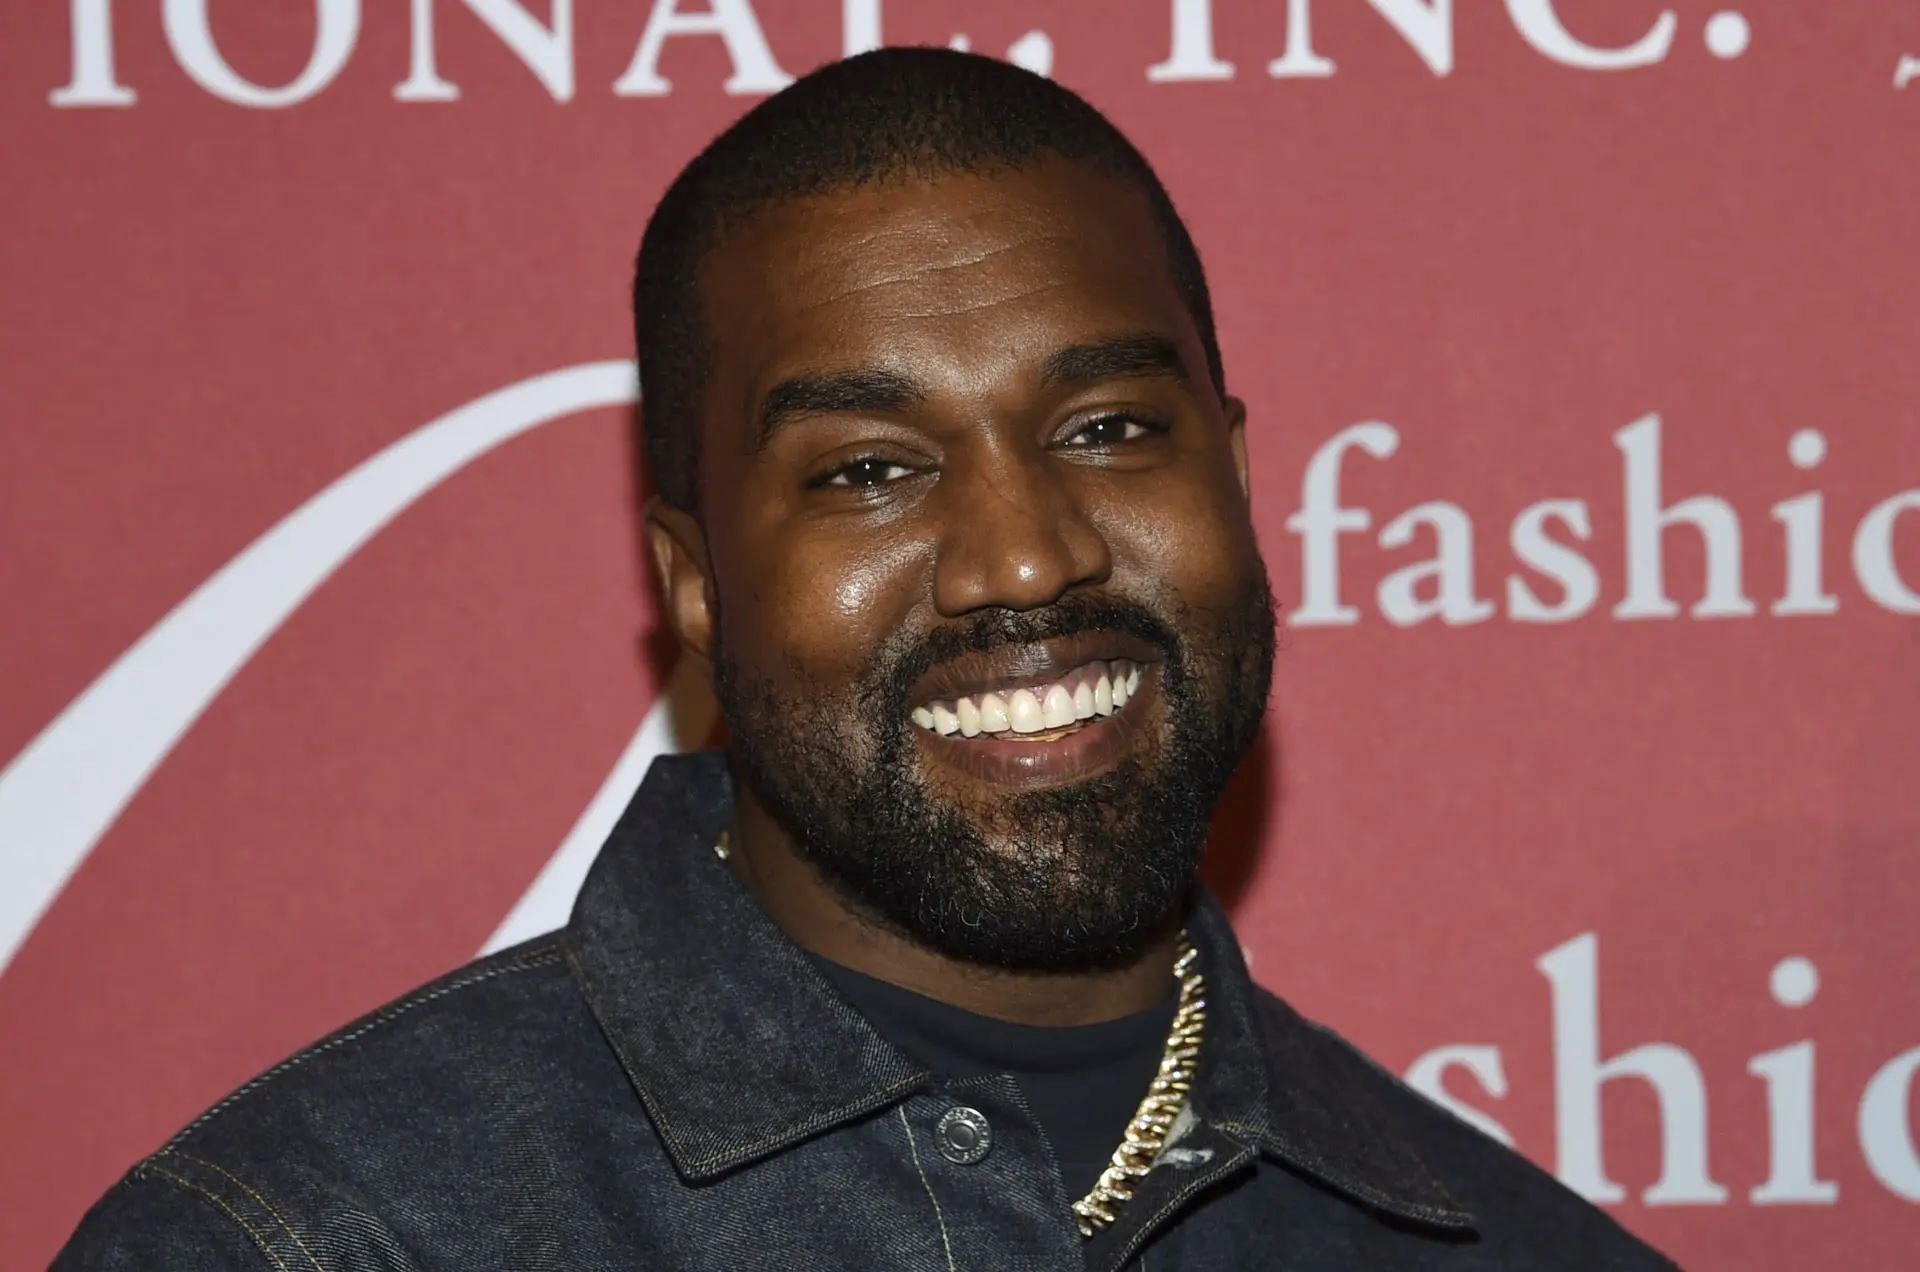 kanye-west-takes-legal-action-against-leaked-music-on-instagram